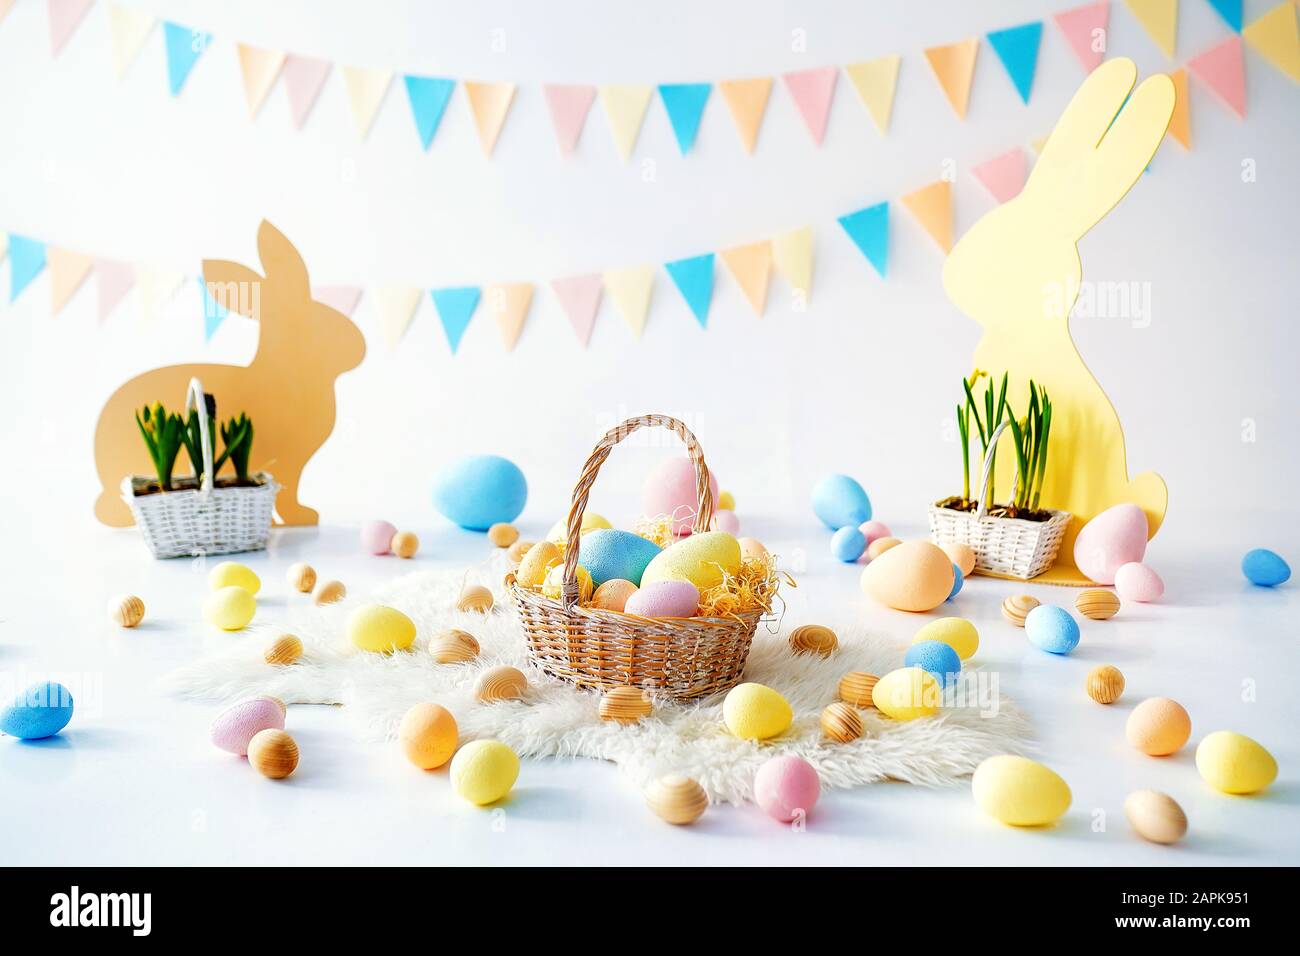 Easter. Many colorful Easter eggs with bunnies and baskets. Easter decoration of the room, children's room for games. Basket with carrots and rabbits. Easter photo shoot. Nest, eggs, boxes of hay. Stock Photo